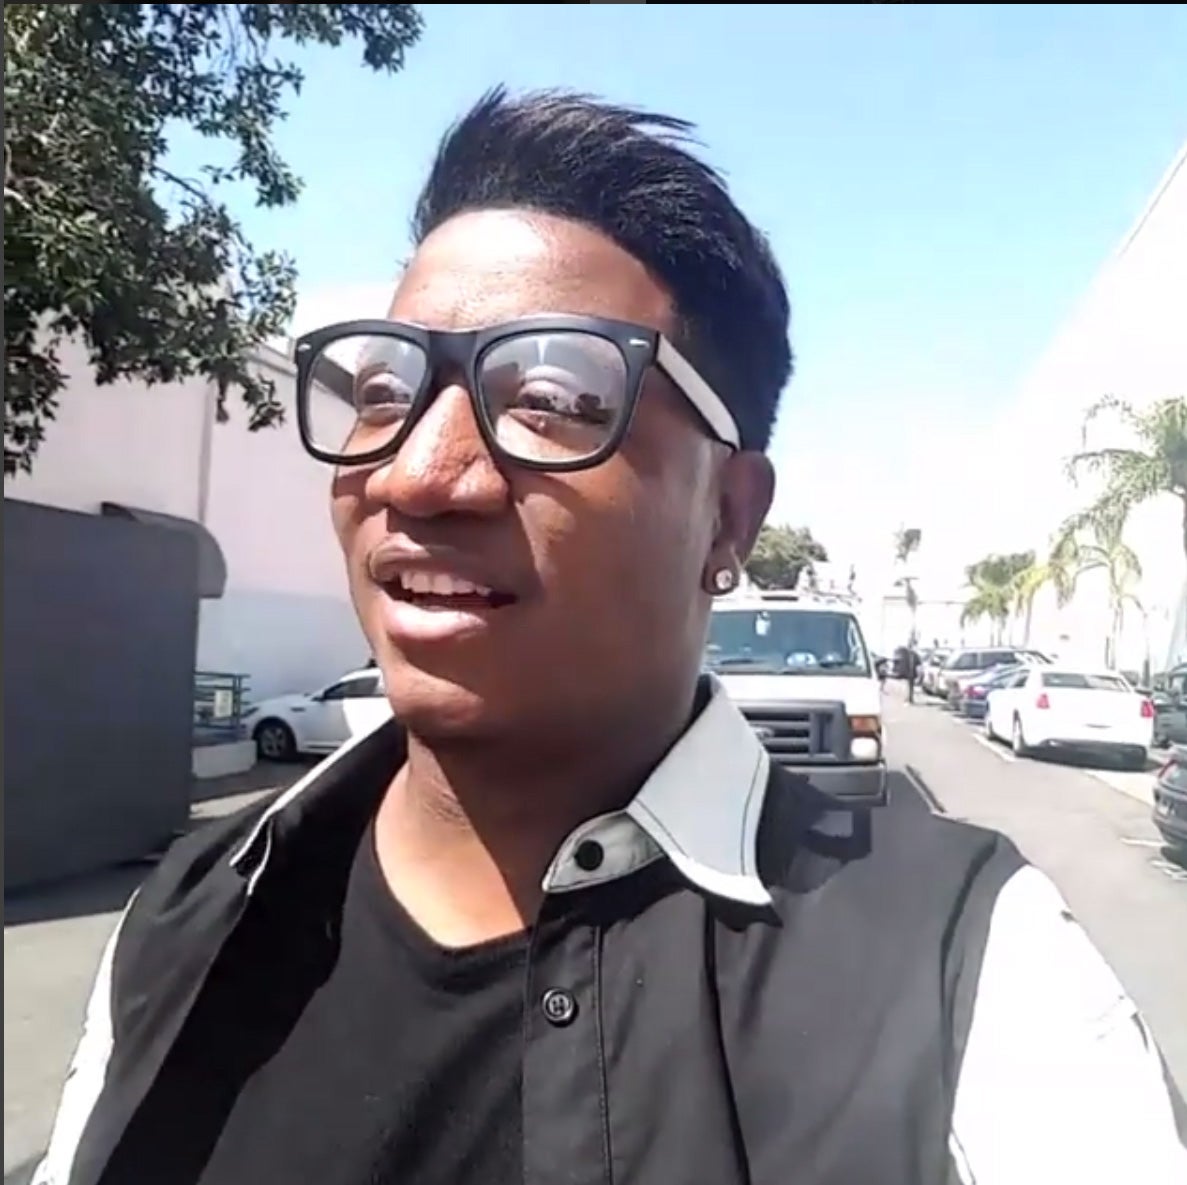 Apparently, Yung Joc Had A Hand In Those Hilarious Memes About His Hair